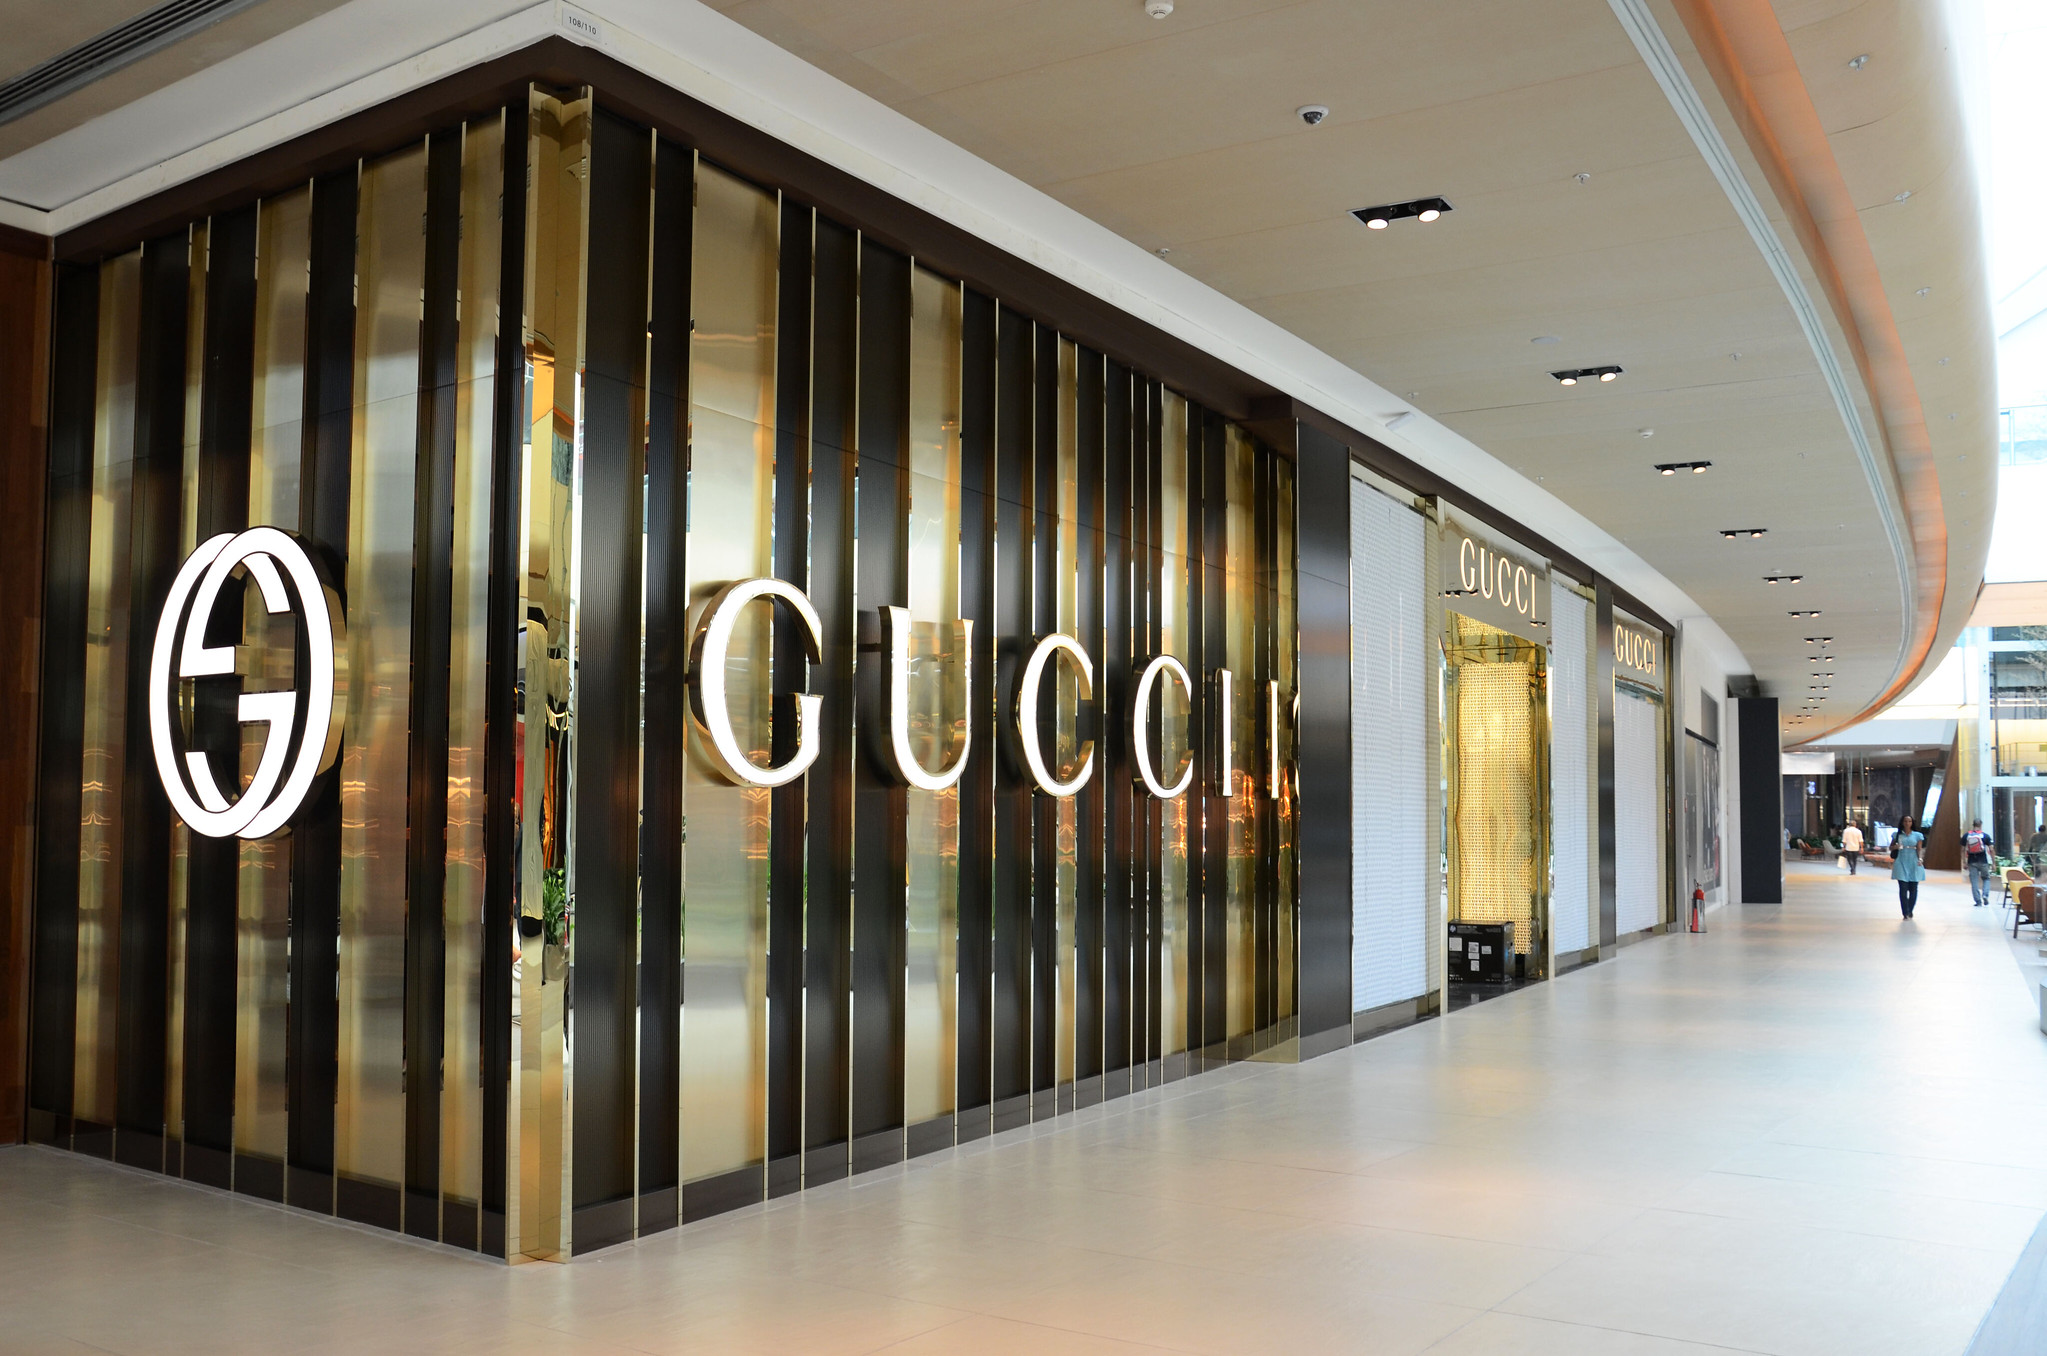 Interior of a shopping mall. A corner unit. The unit has glass walls with vertical stripes. One wall is emblazoned with 'Gucci' in large letters. The other has the Gucci logo (two interlocked capital Gs). Image: Alexandre Macieira/Riotur